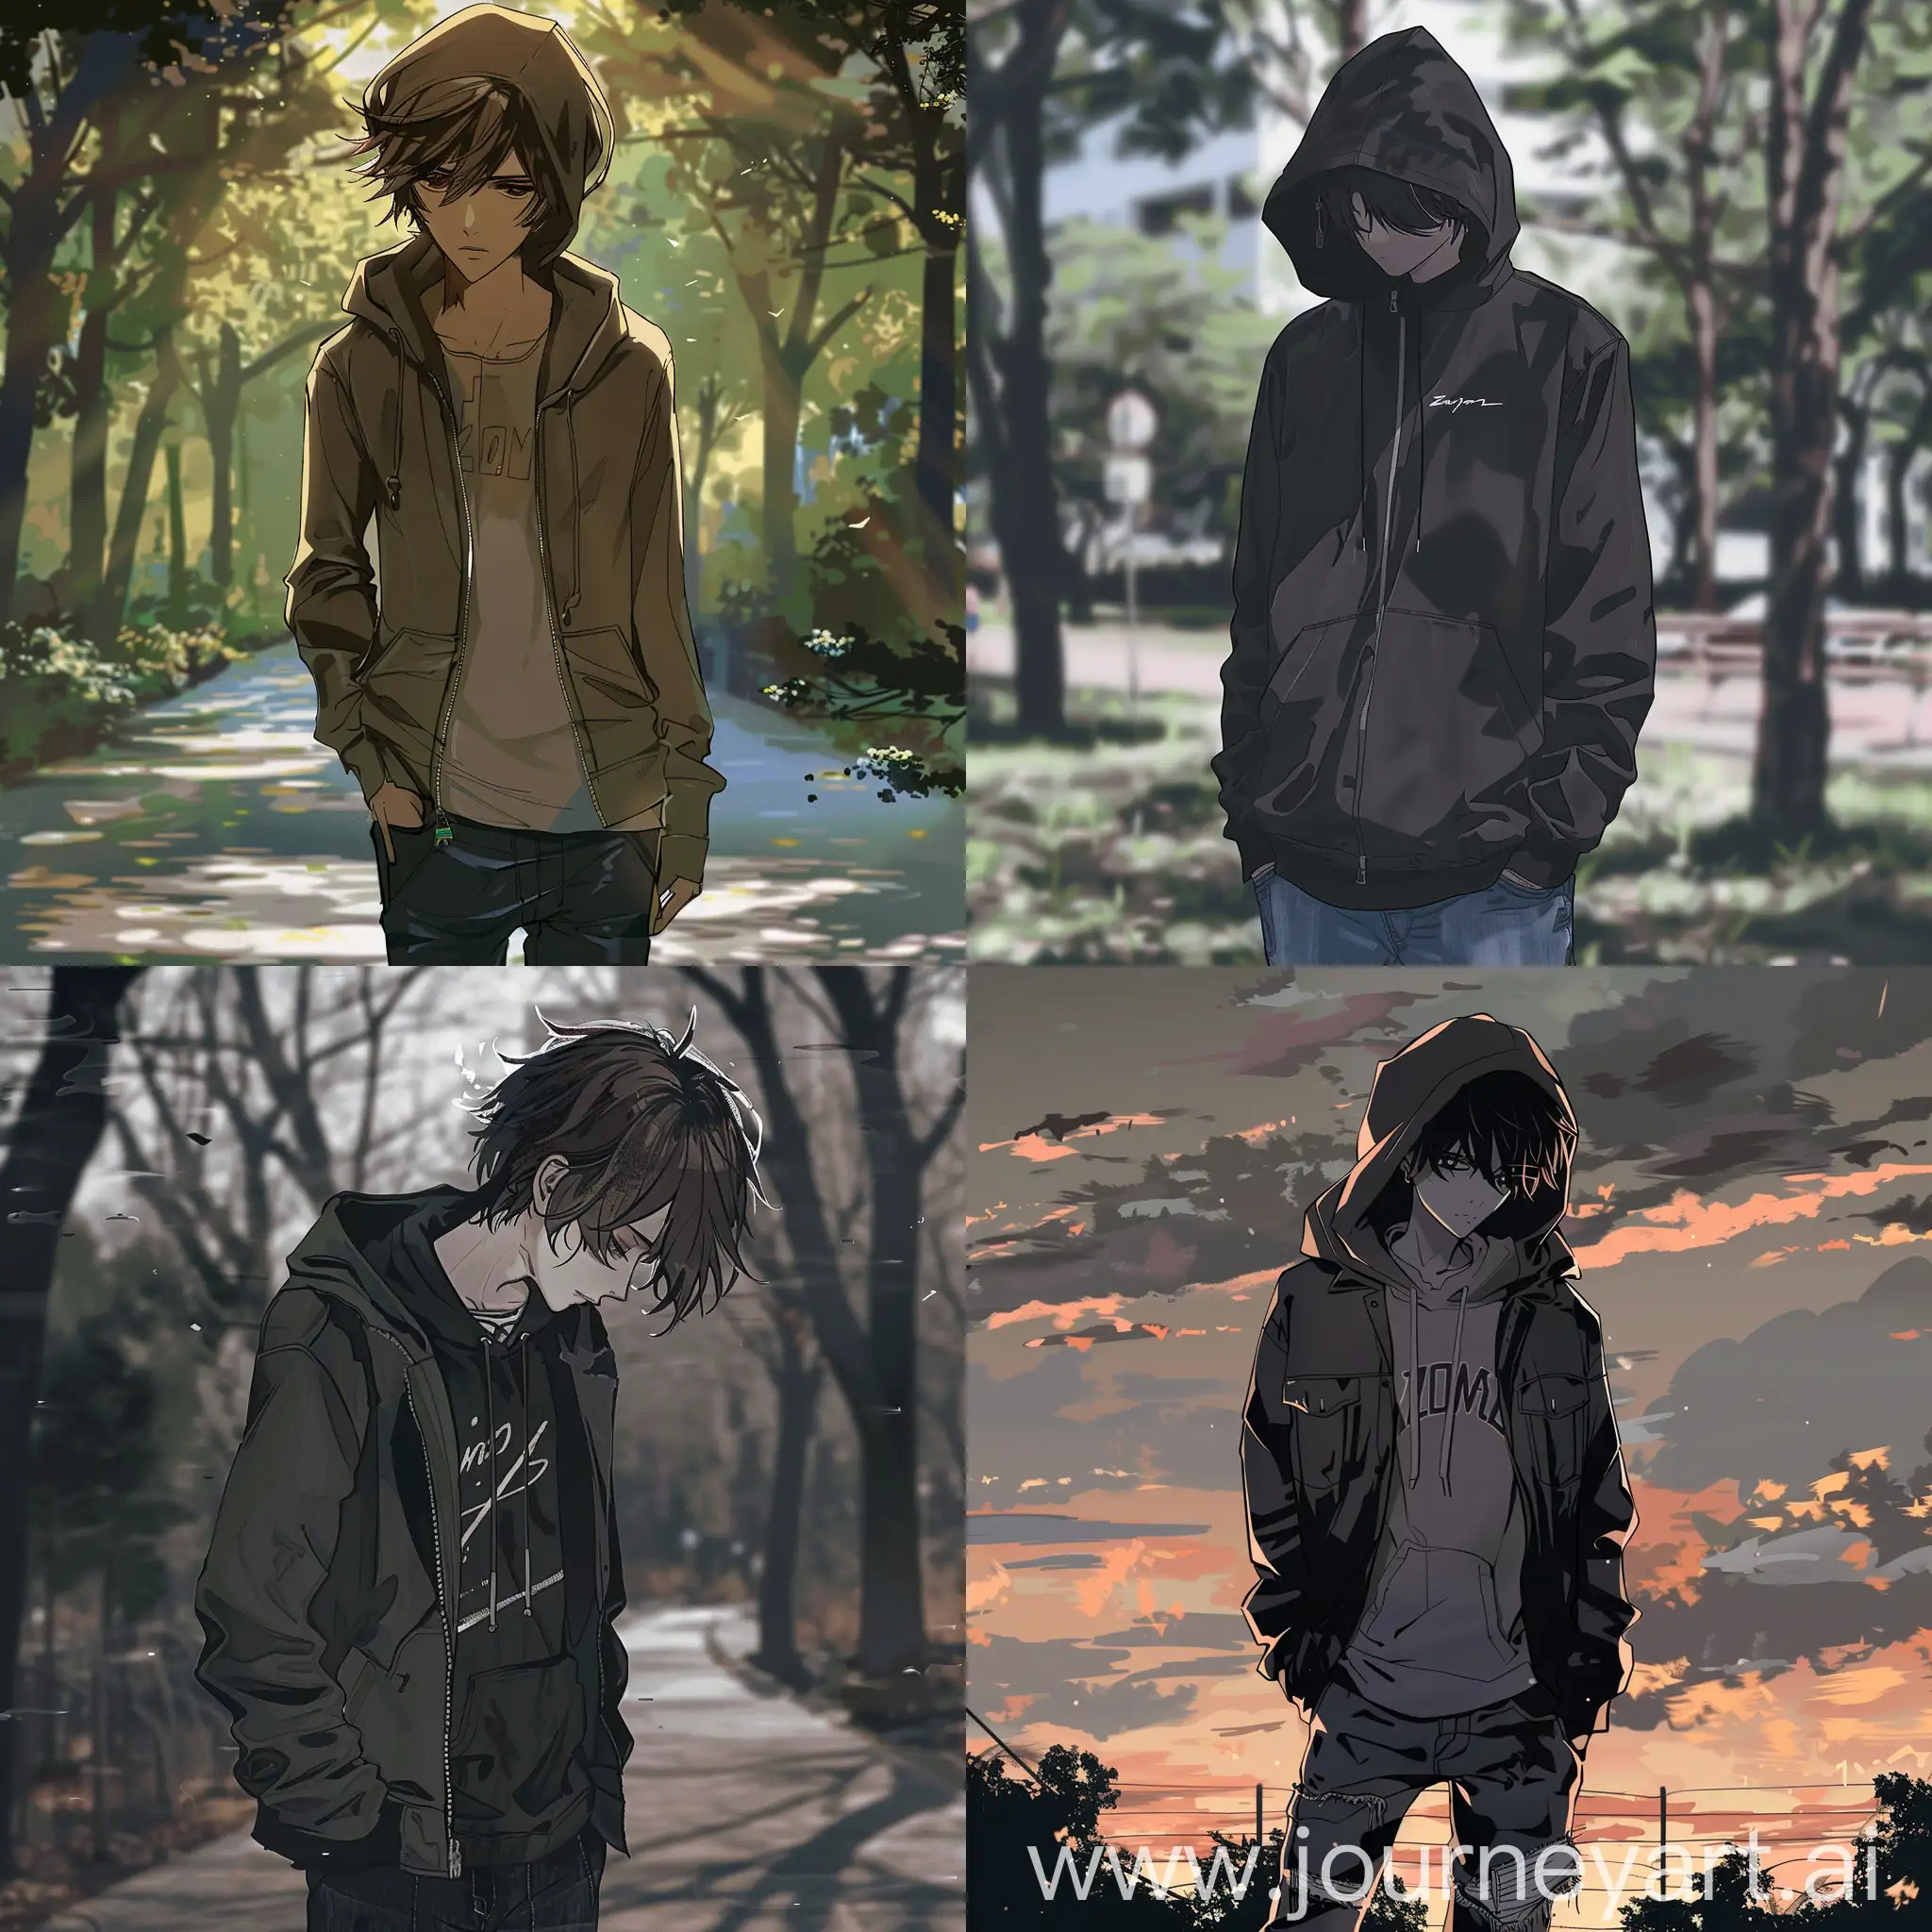 Anime-Style-Picture-of-a-Guy-in-Hoodies-and-Jeans-at-a-Park-with-Zom-Poir-Jacket